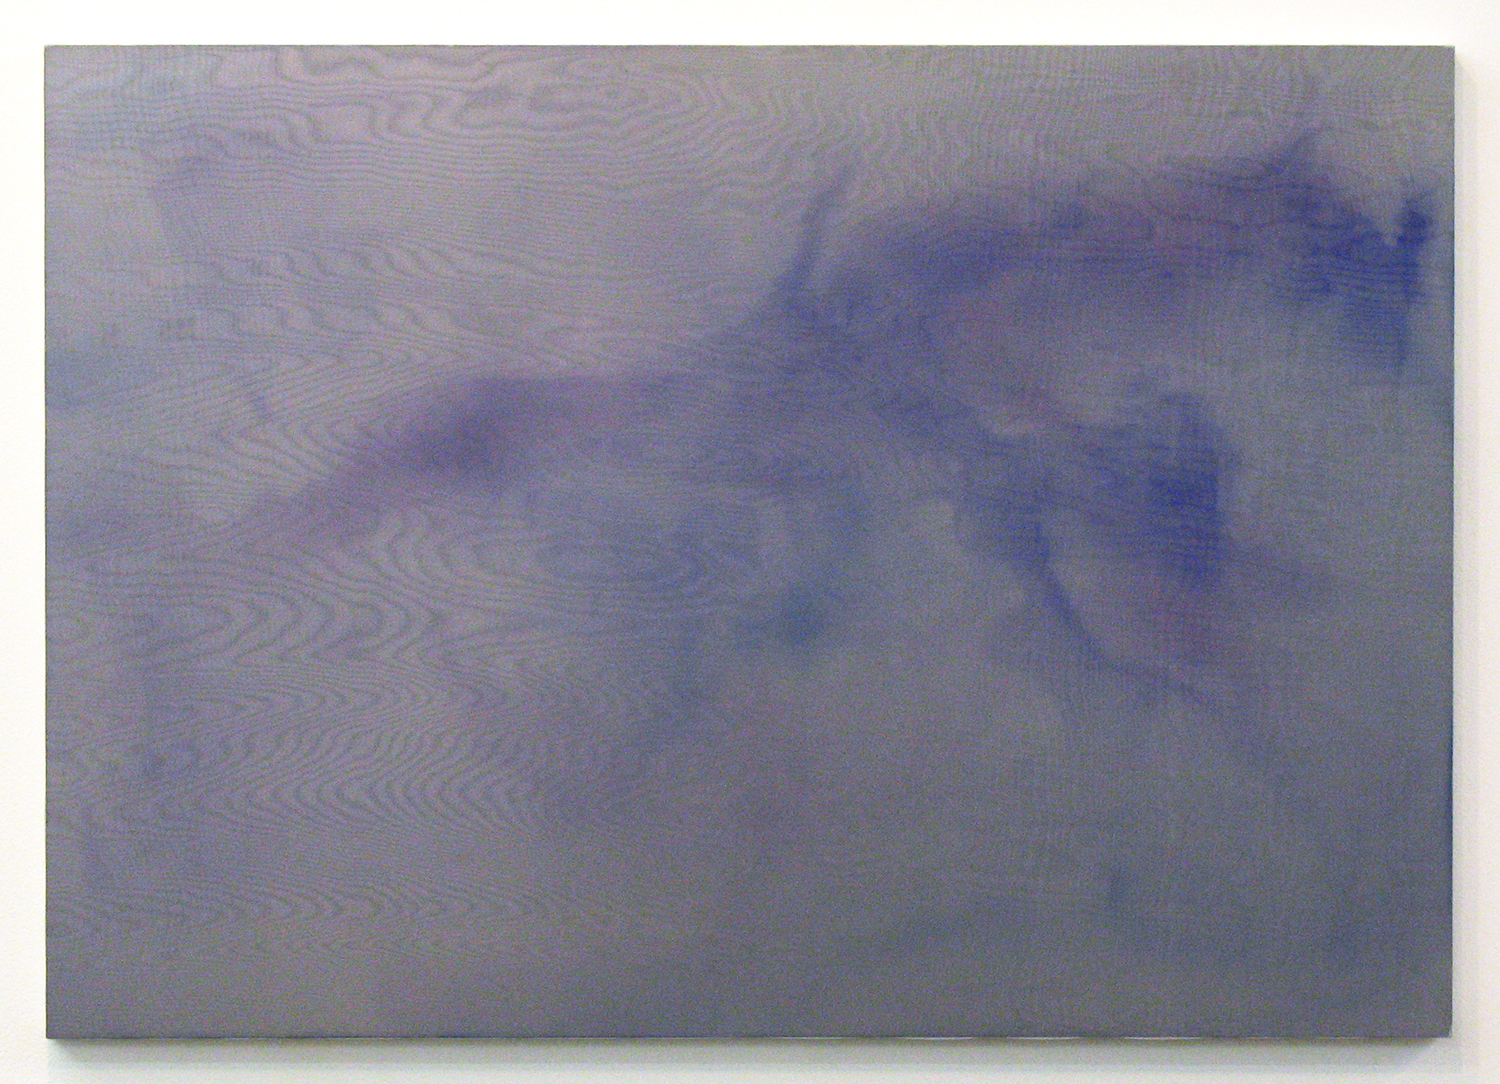 afterglow #5｜残光 #5｜panel, stainless steel sheet, glass organdy, acrylic｜594 x 840 mm｜2008